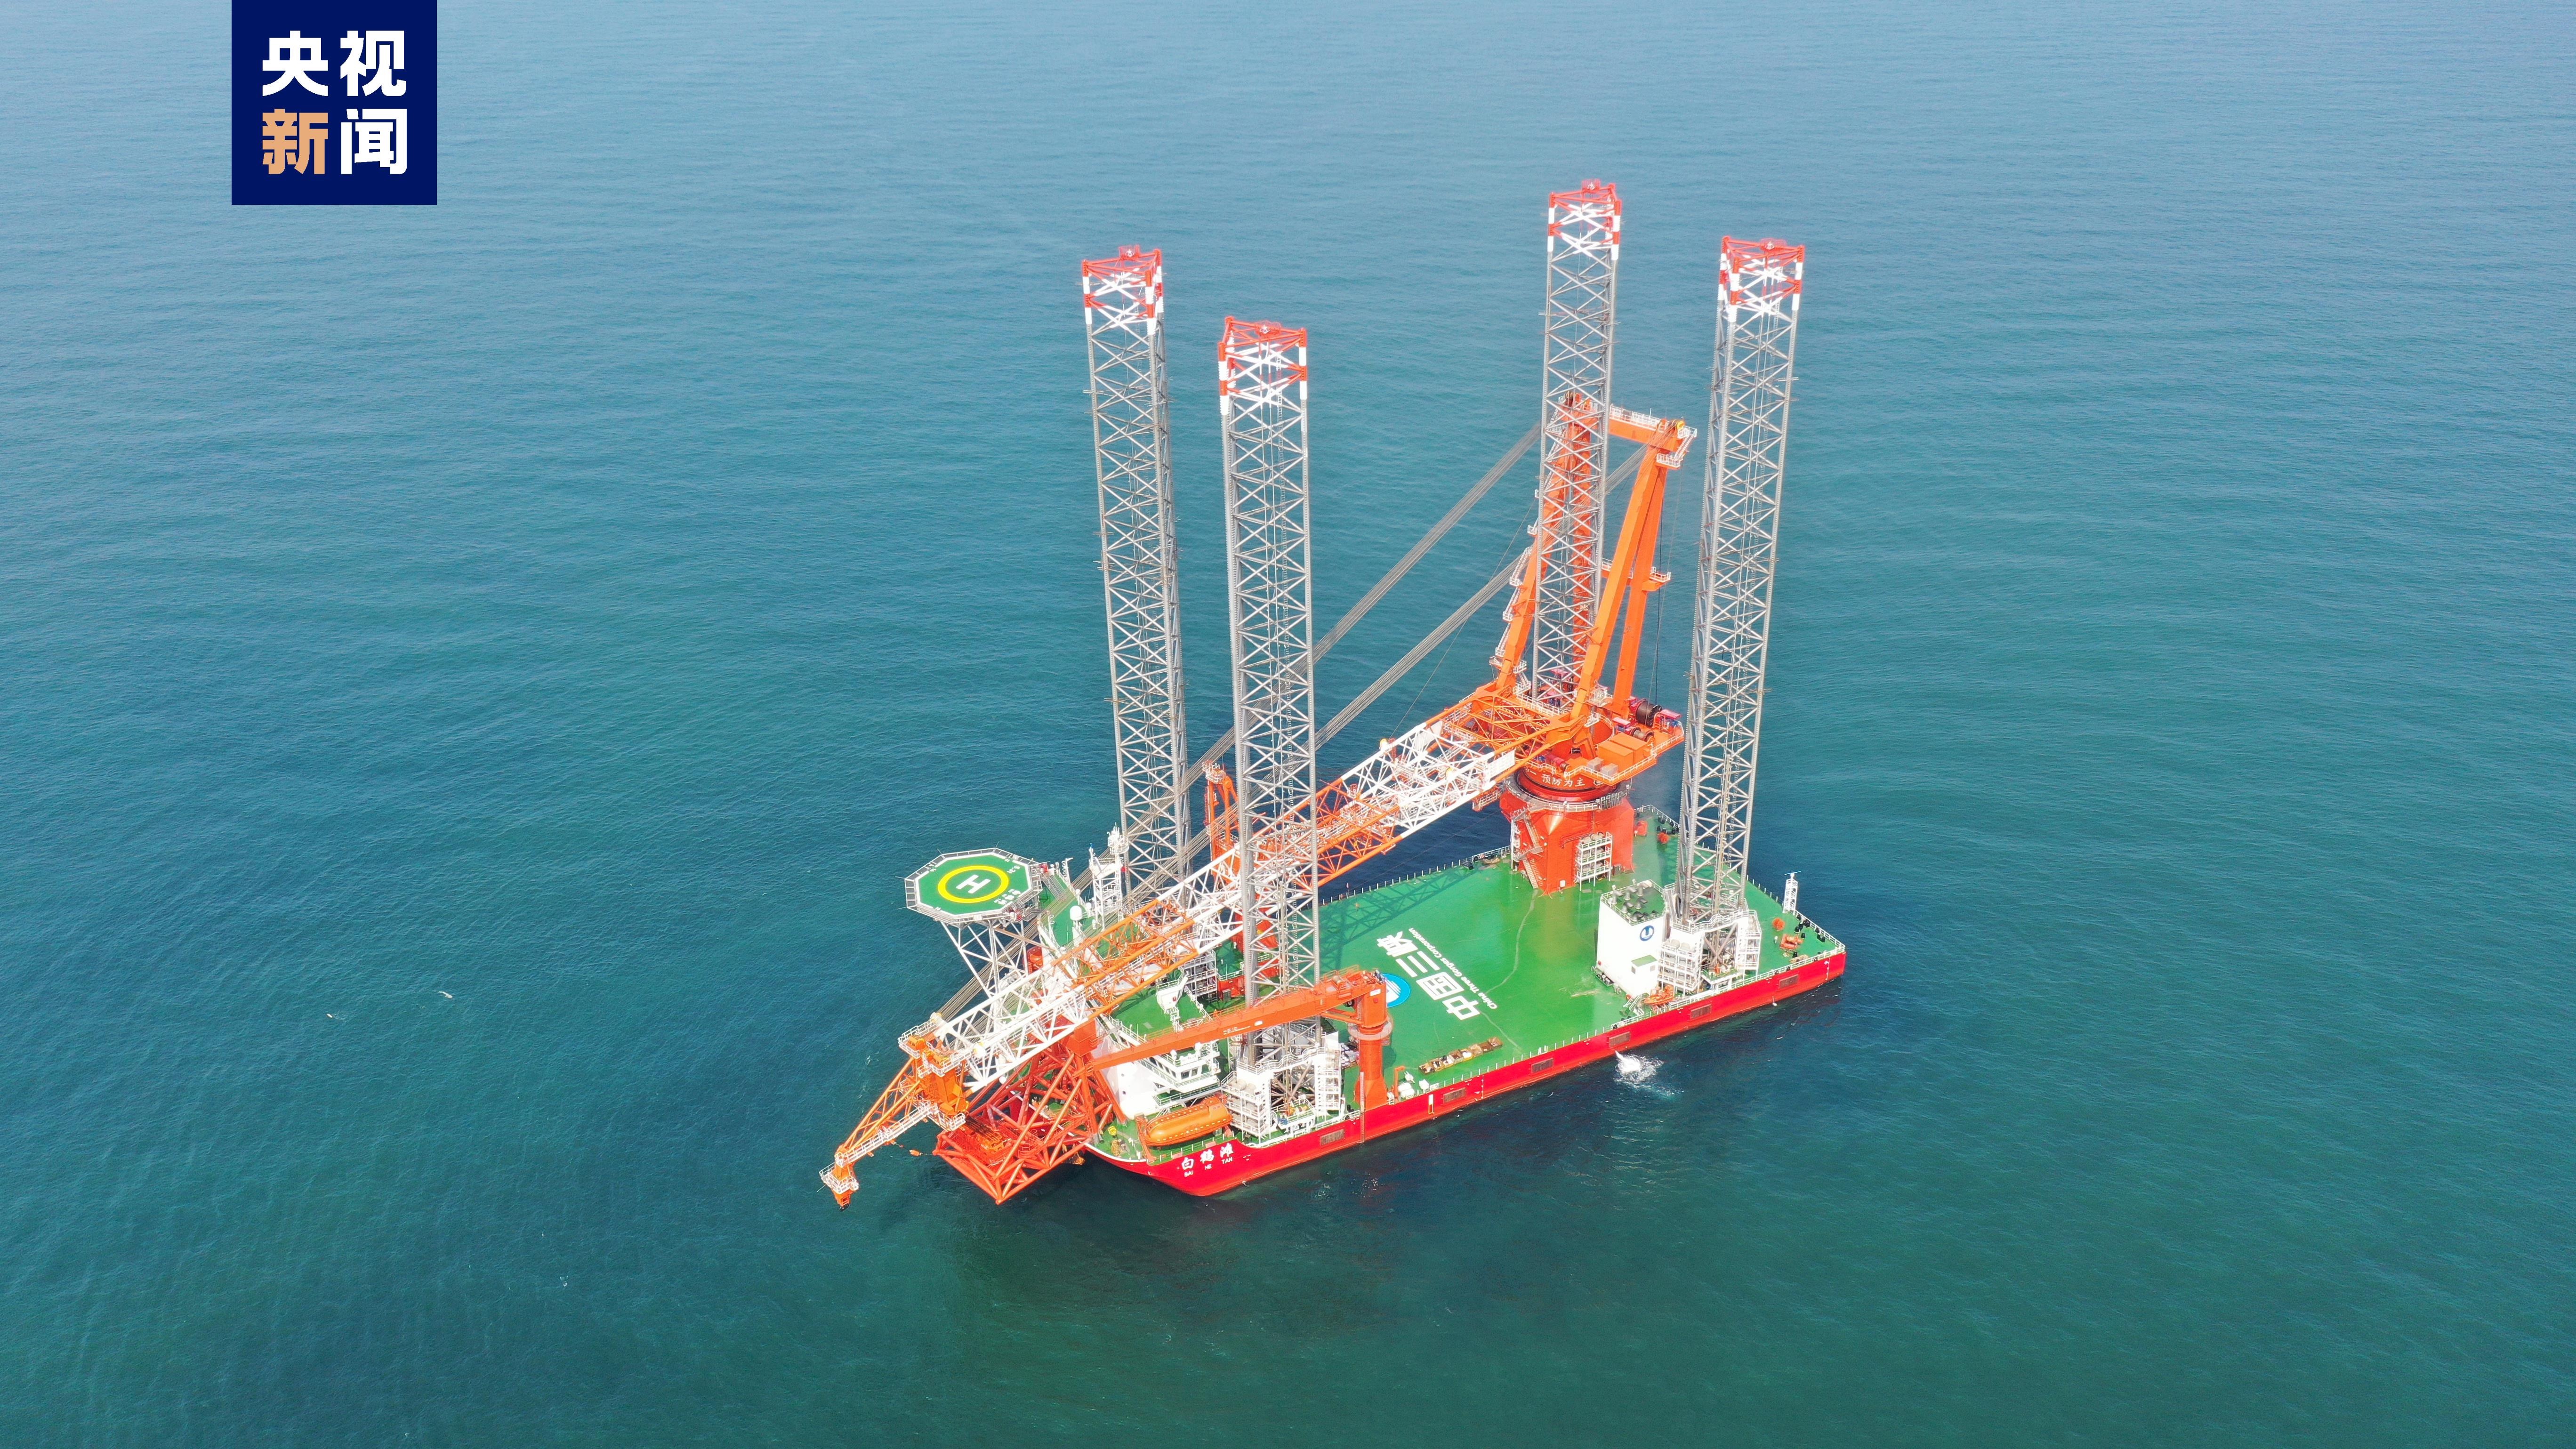 Baihetan wind farm installation vessel delivered in Nansha District of Guangzhou, south China's Guangdong Province on September 28, 2022. / China Media Group (CMG)